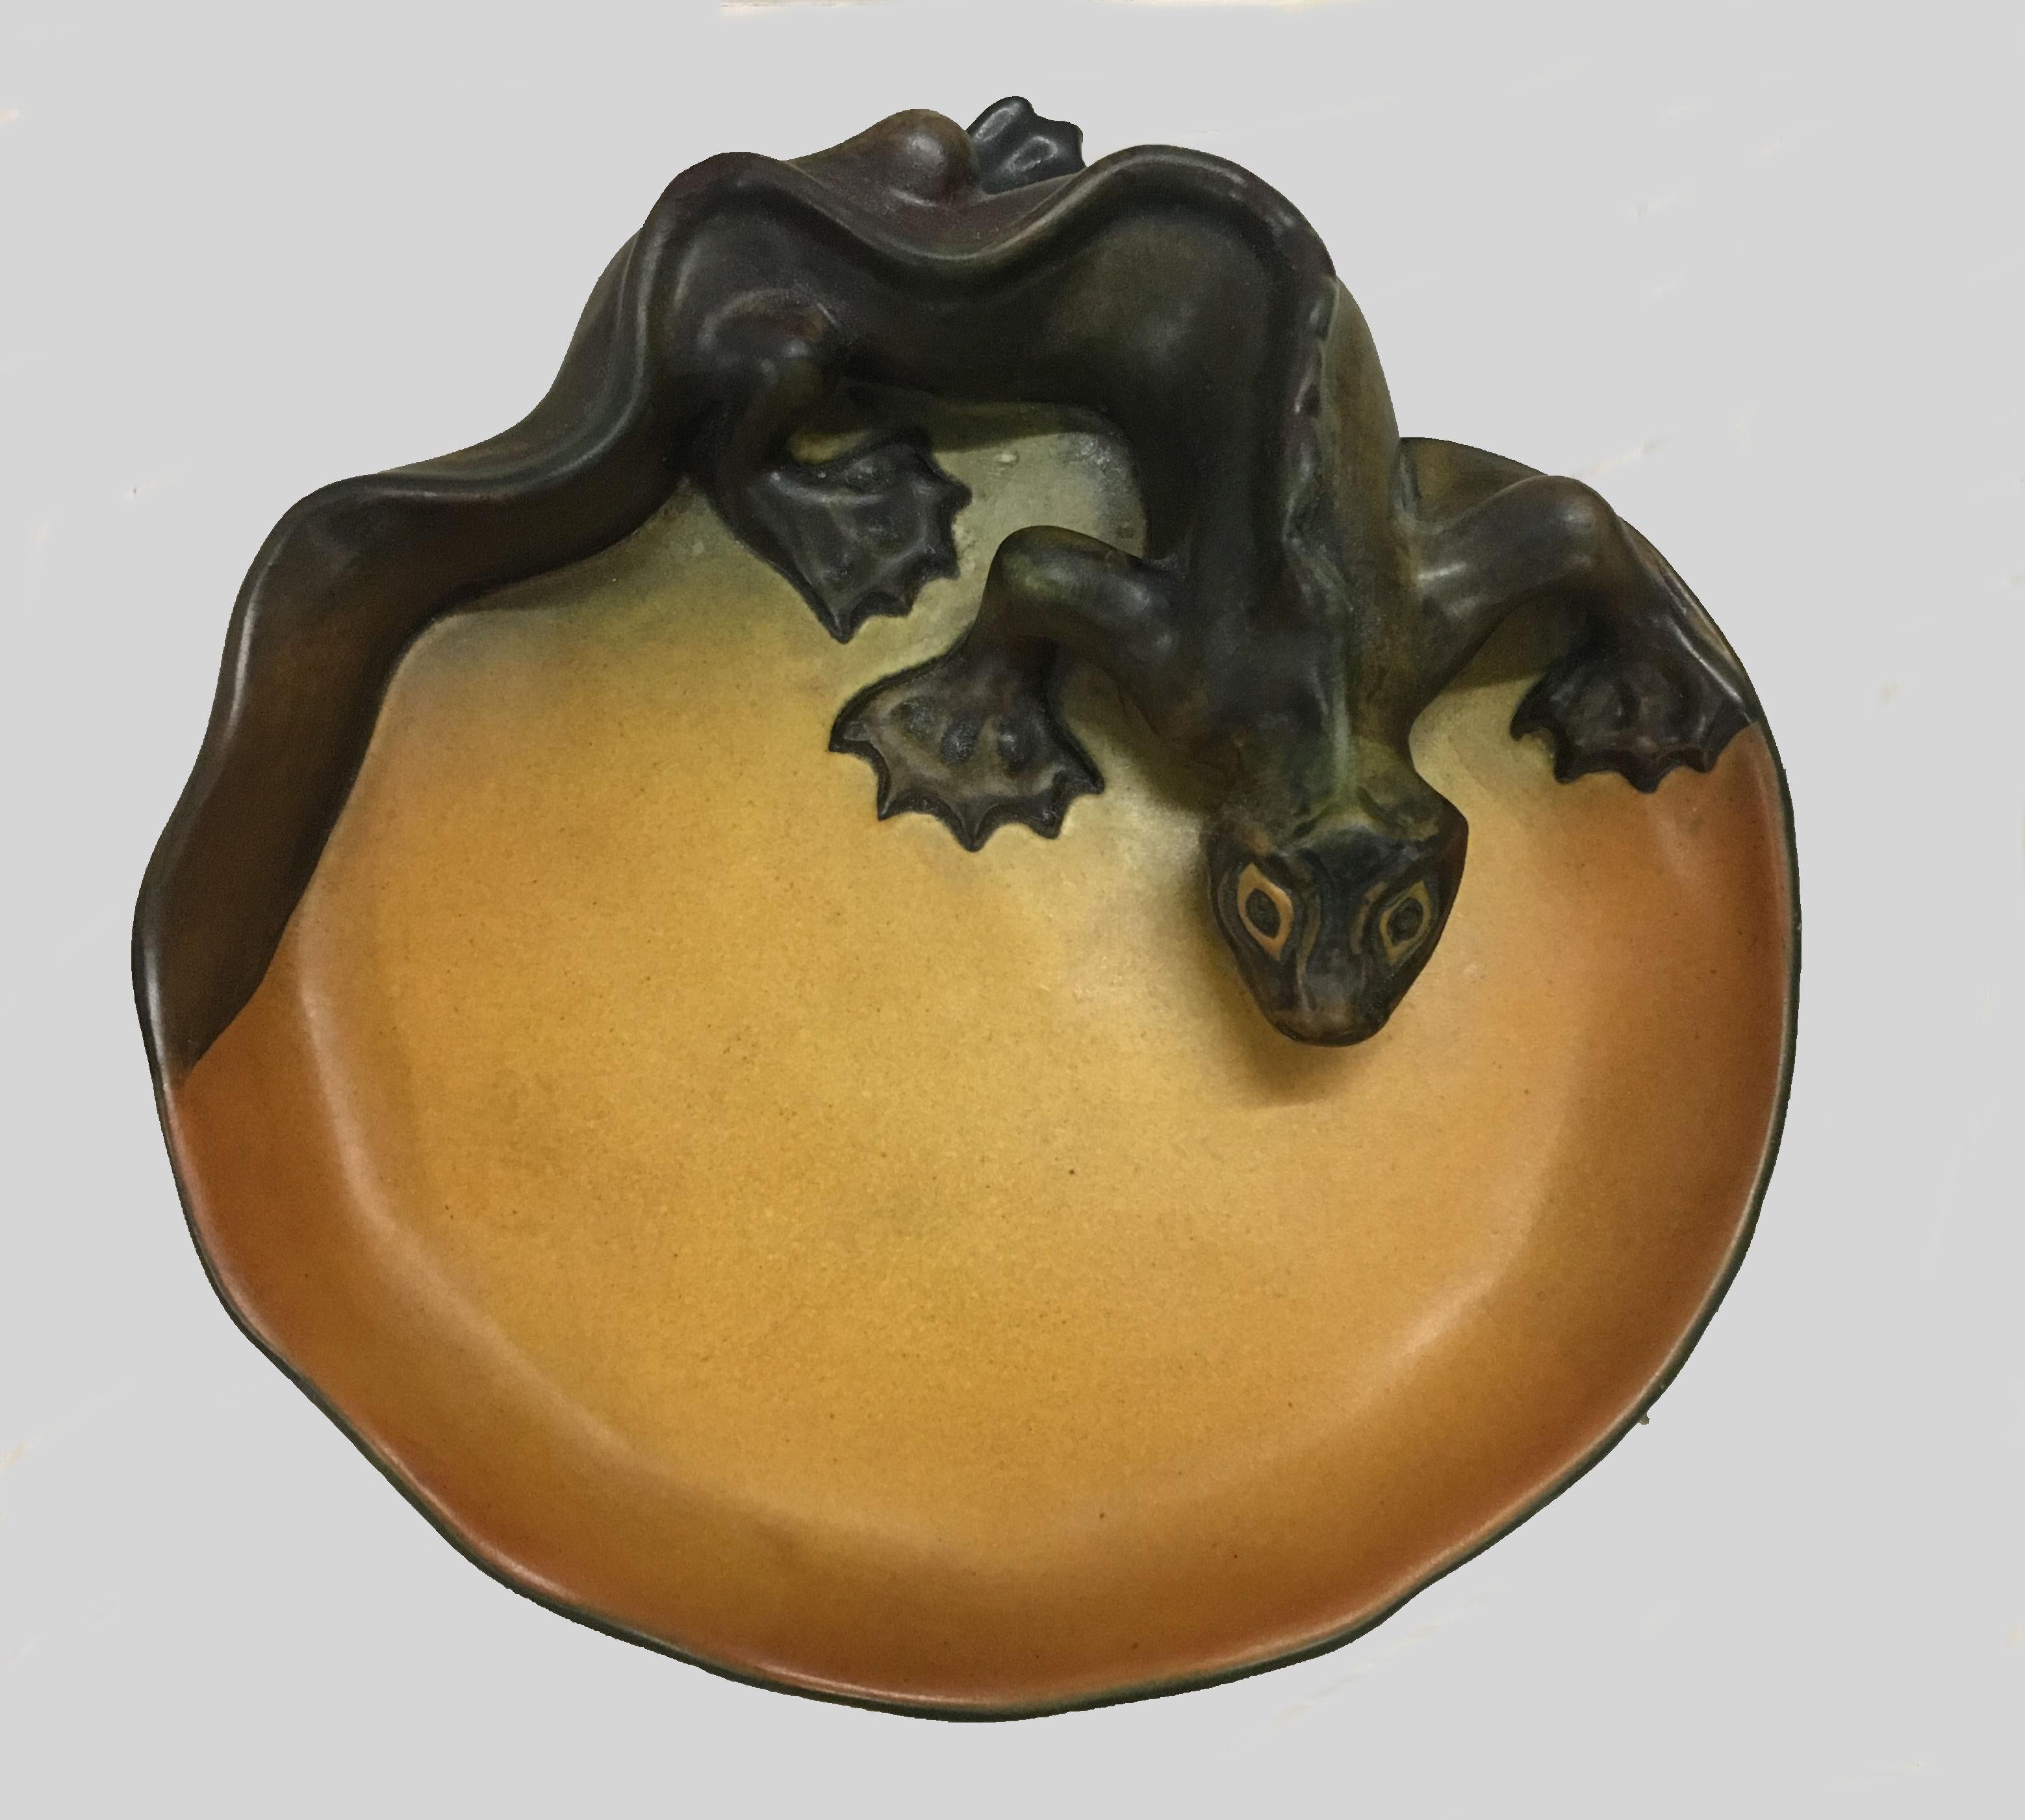 Ceramic 1900's Hand-Crafted Danish Art Nouveau Lizard Ash Tray / Bowl by P. Ibsens Enke For Sale